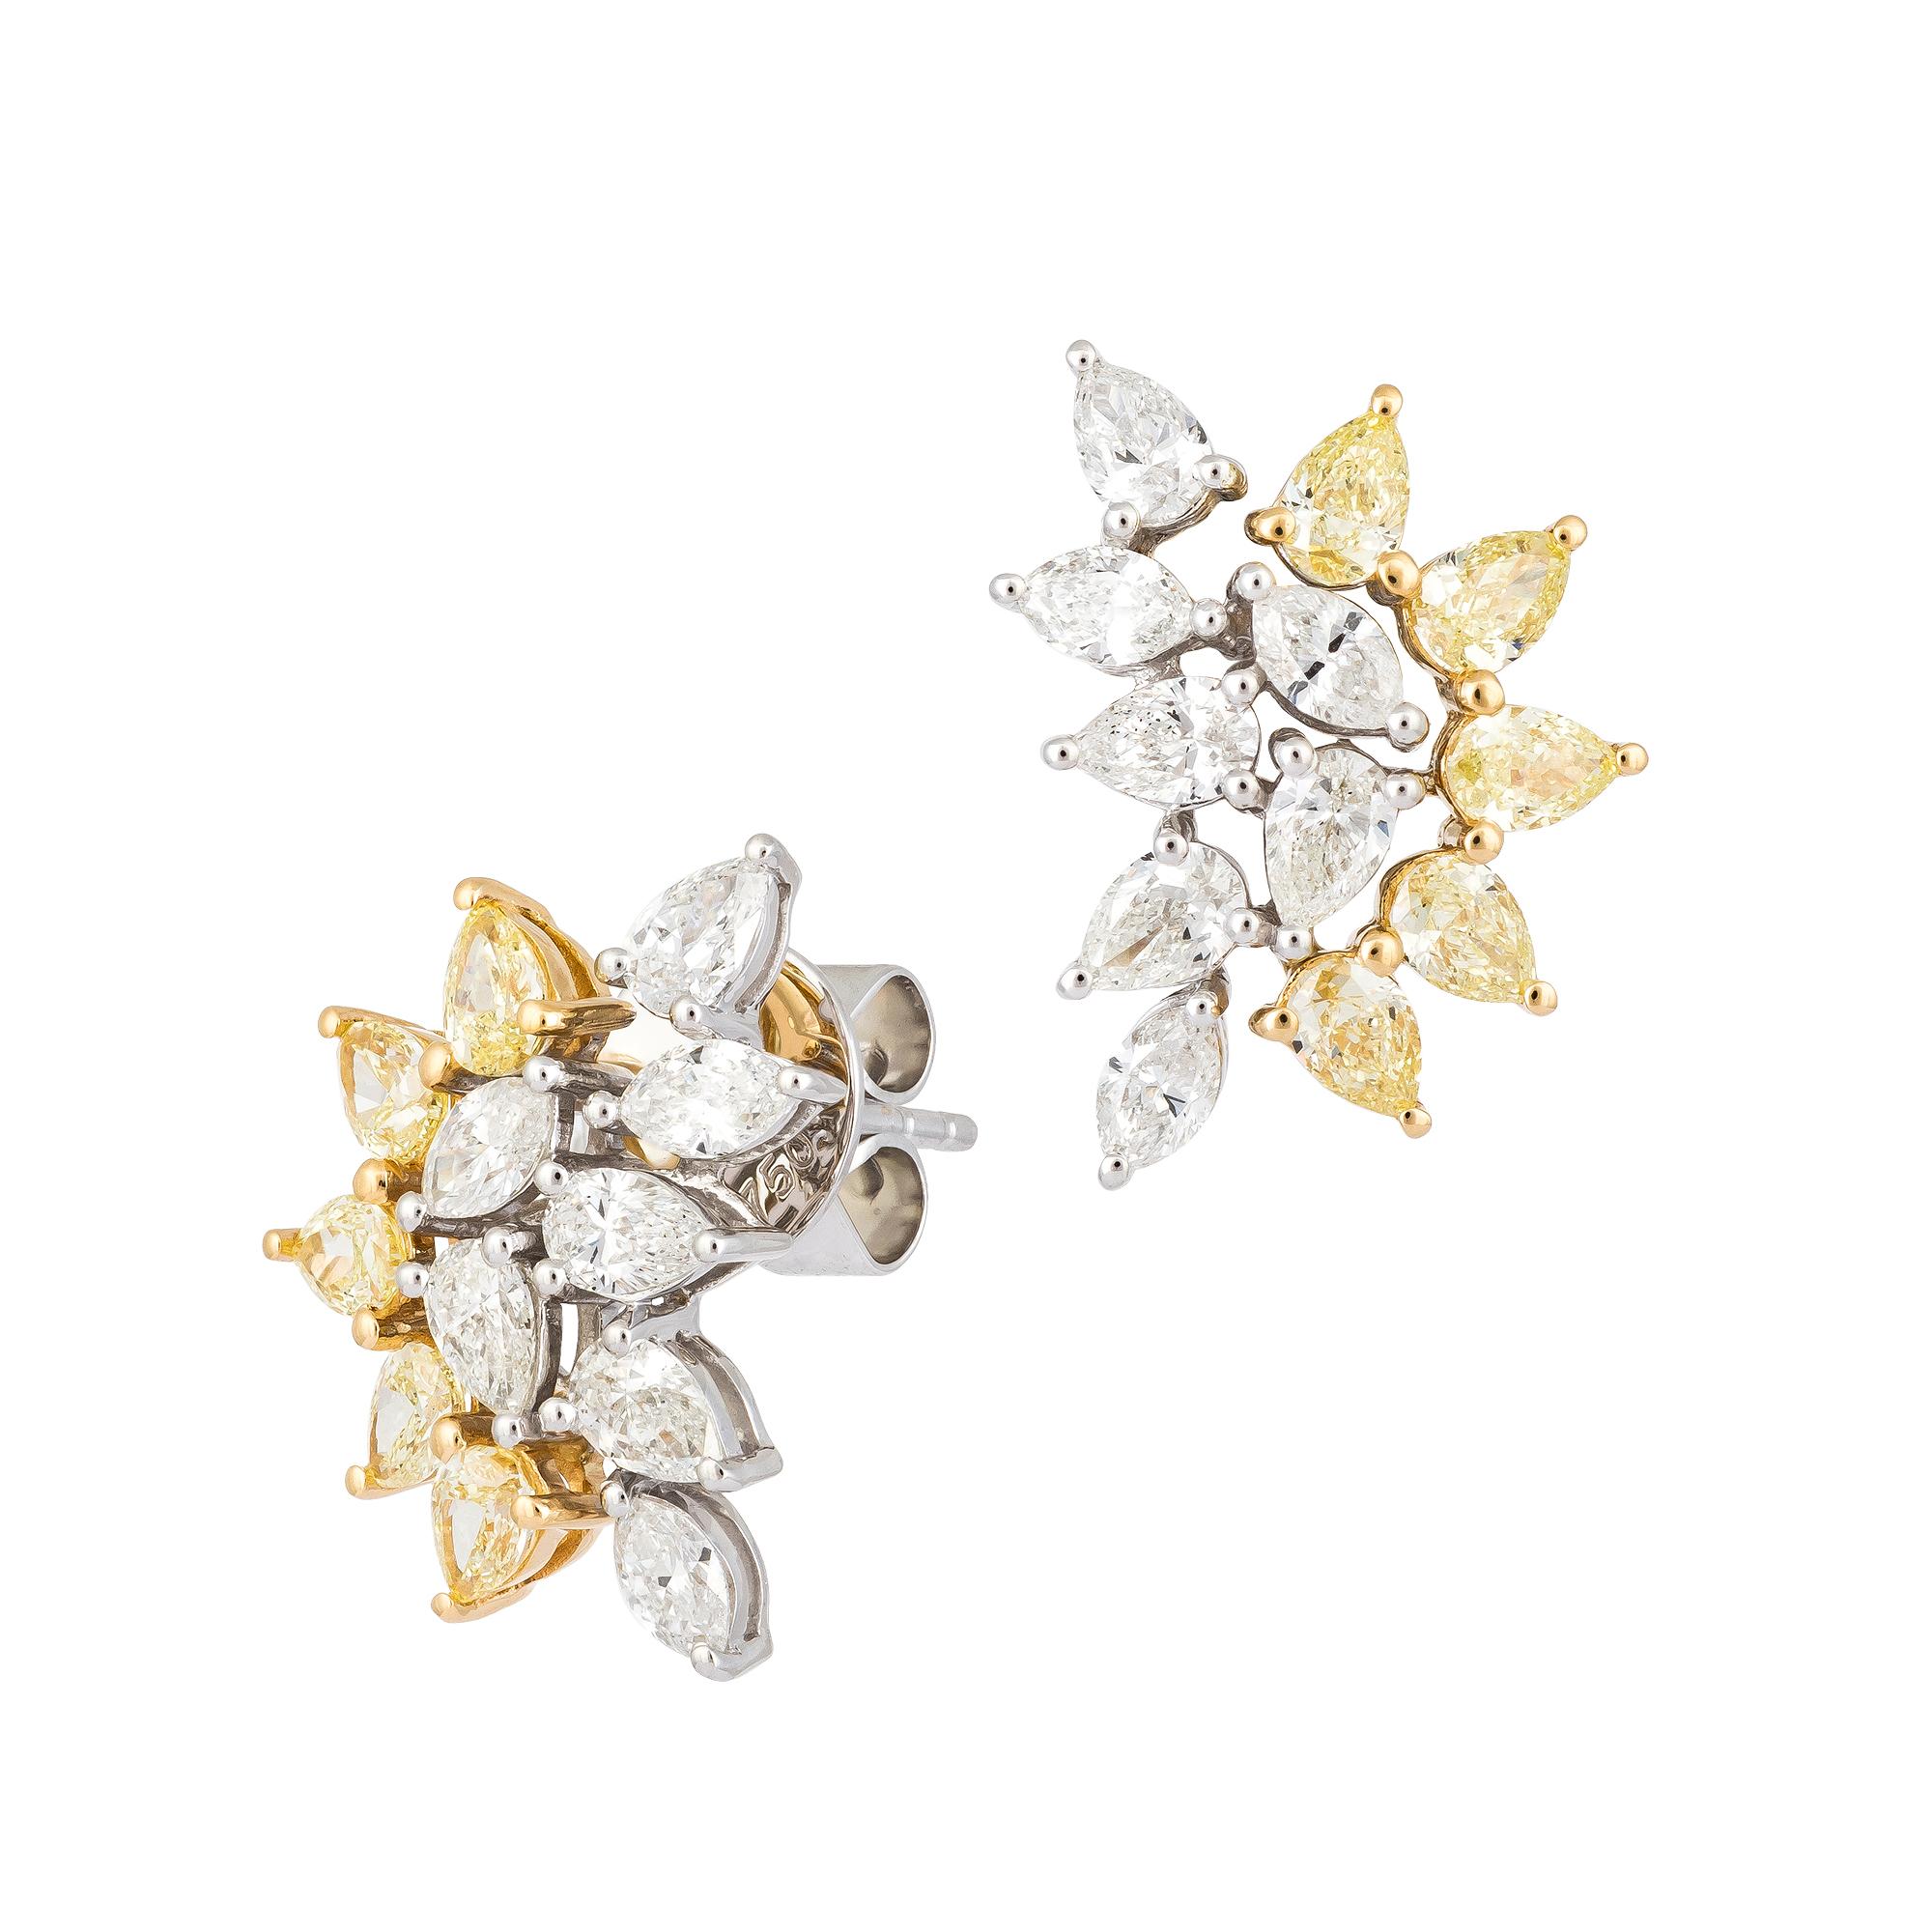 EARRINGS 18K White Gold
MQ 0.48 Cts/6 Pieces
PE 0.73 Cts/8 Pieces
Yellow Diamond 1.19 Cts/10 Pieces

With a heritage of ancient fine Swiss jewelry traditions, NATKINA is a Geneva based jewellery brand, which creates modern jewellery masterpieces